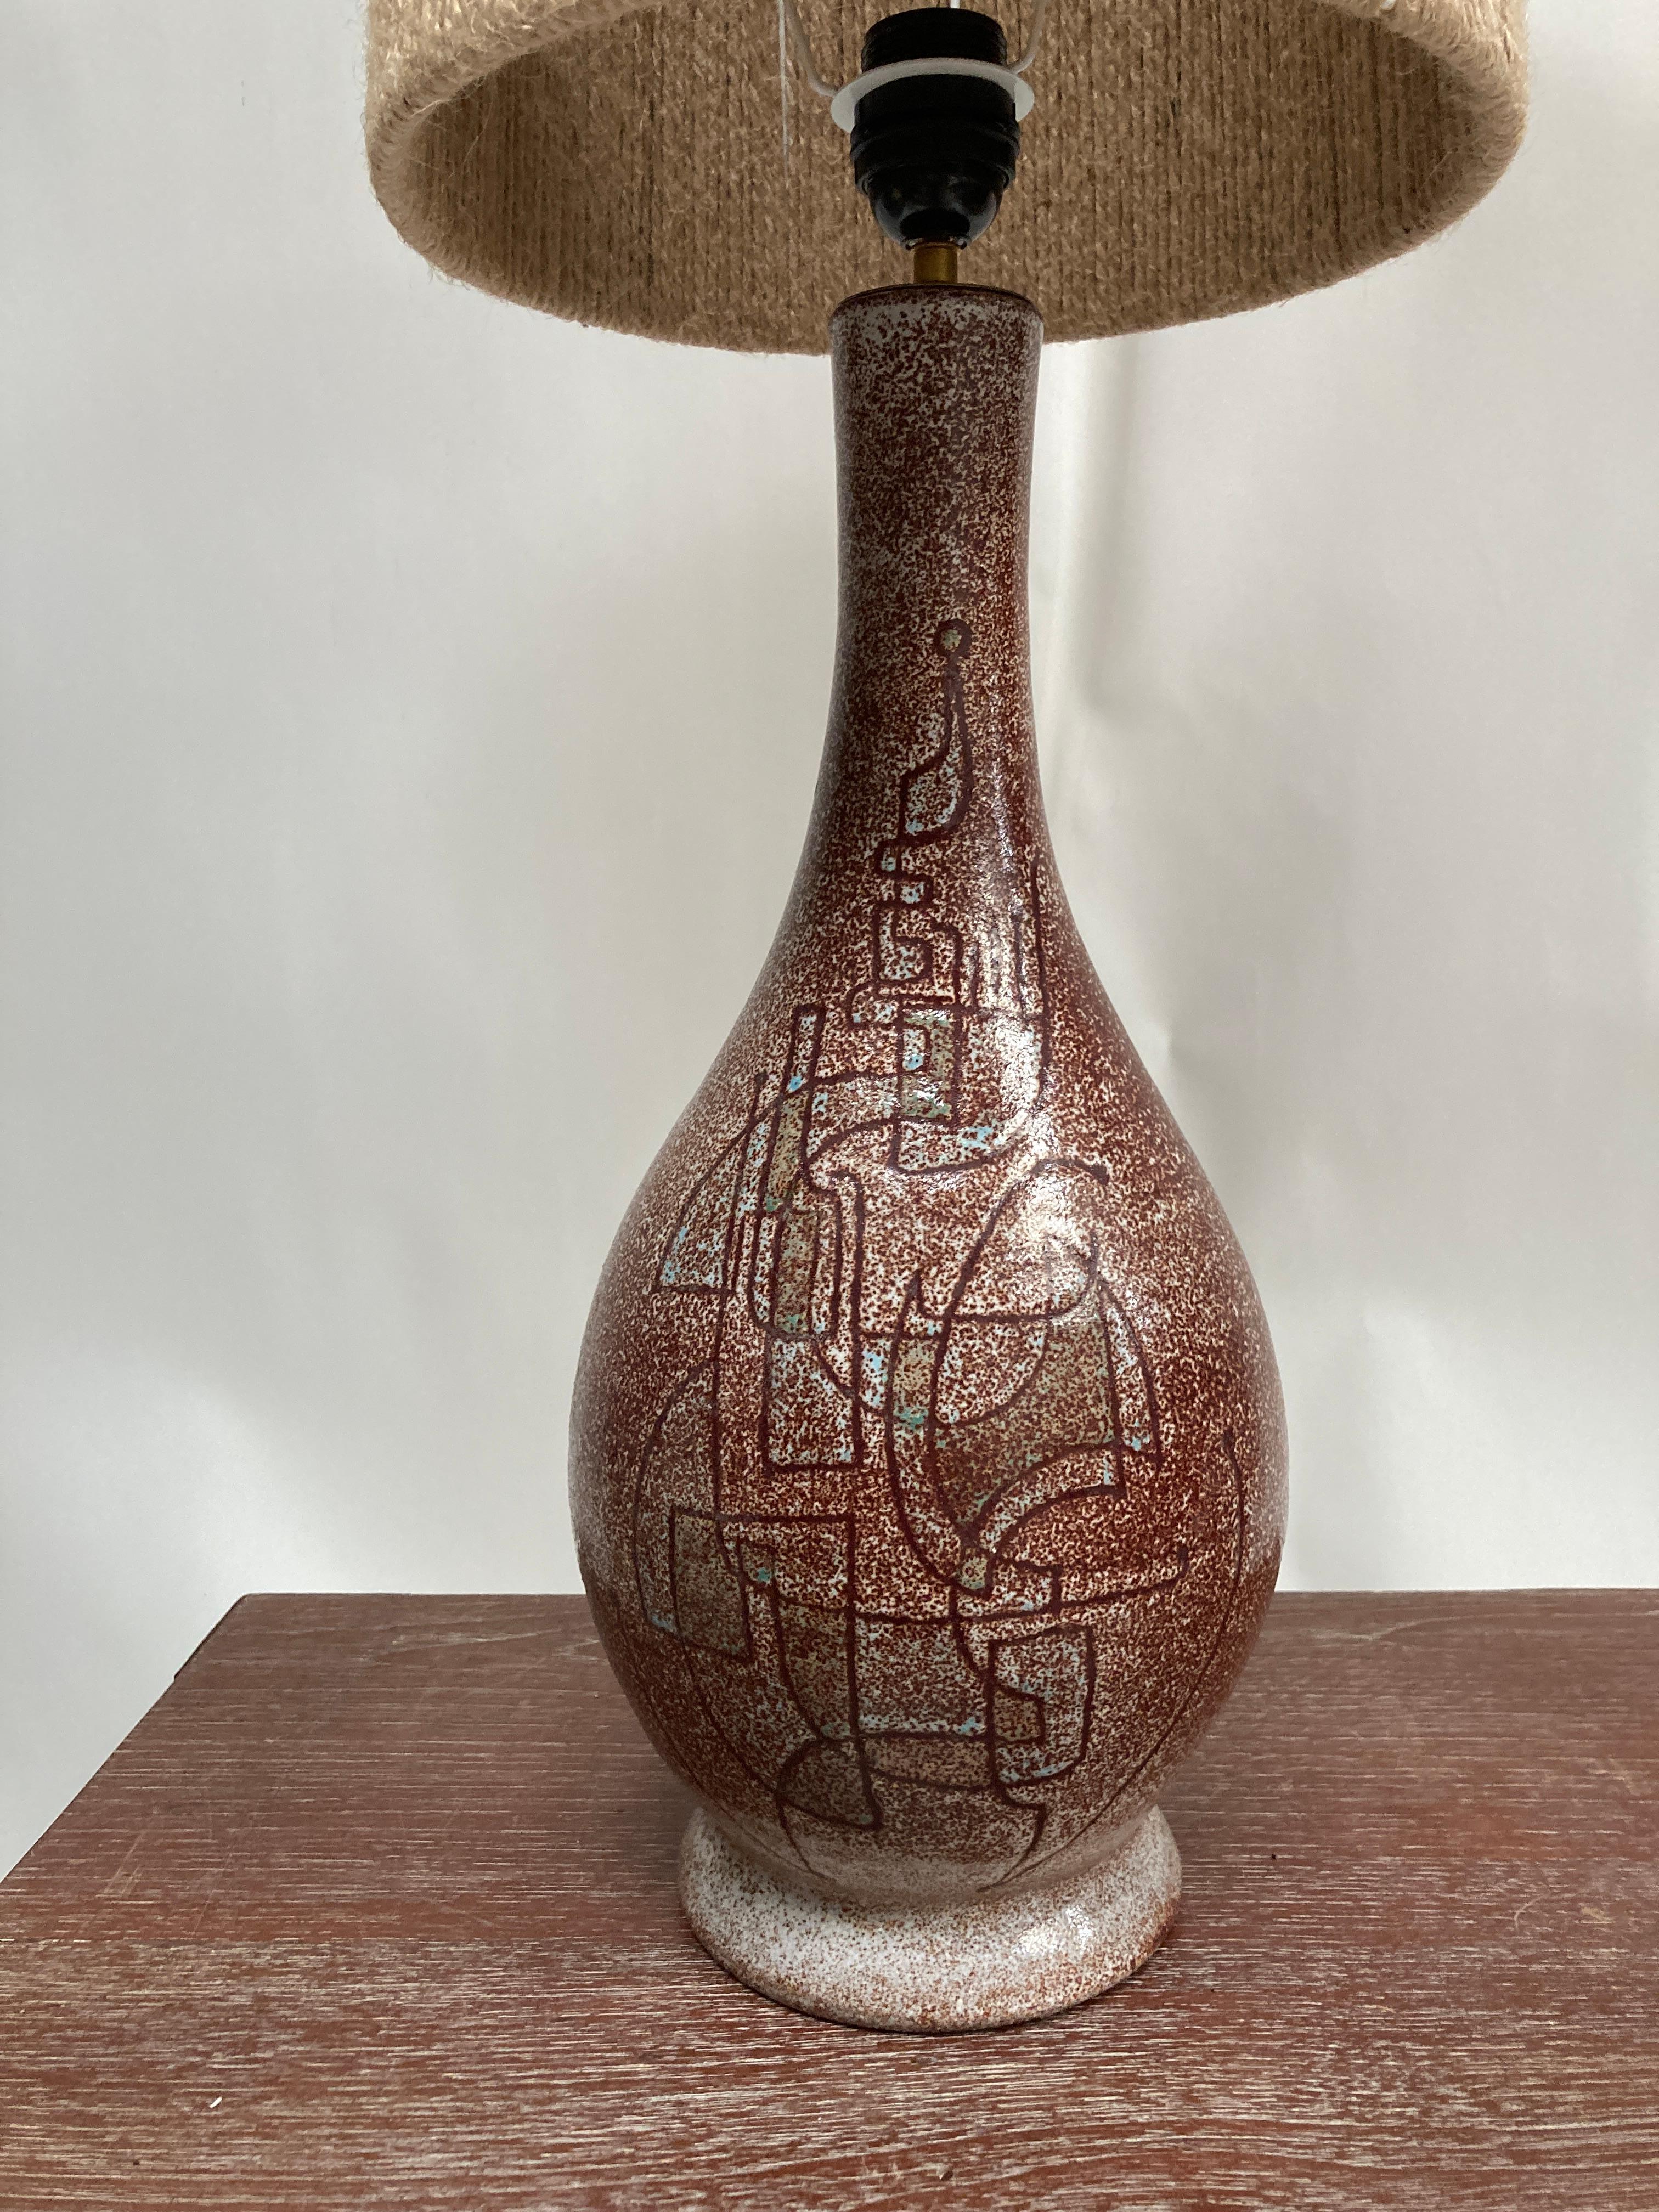 Very nice One of a kind 1950's Studio pottery ceramic lamp with abstract decoration
France
Signed by J C Accolay